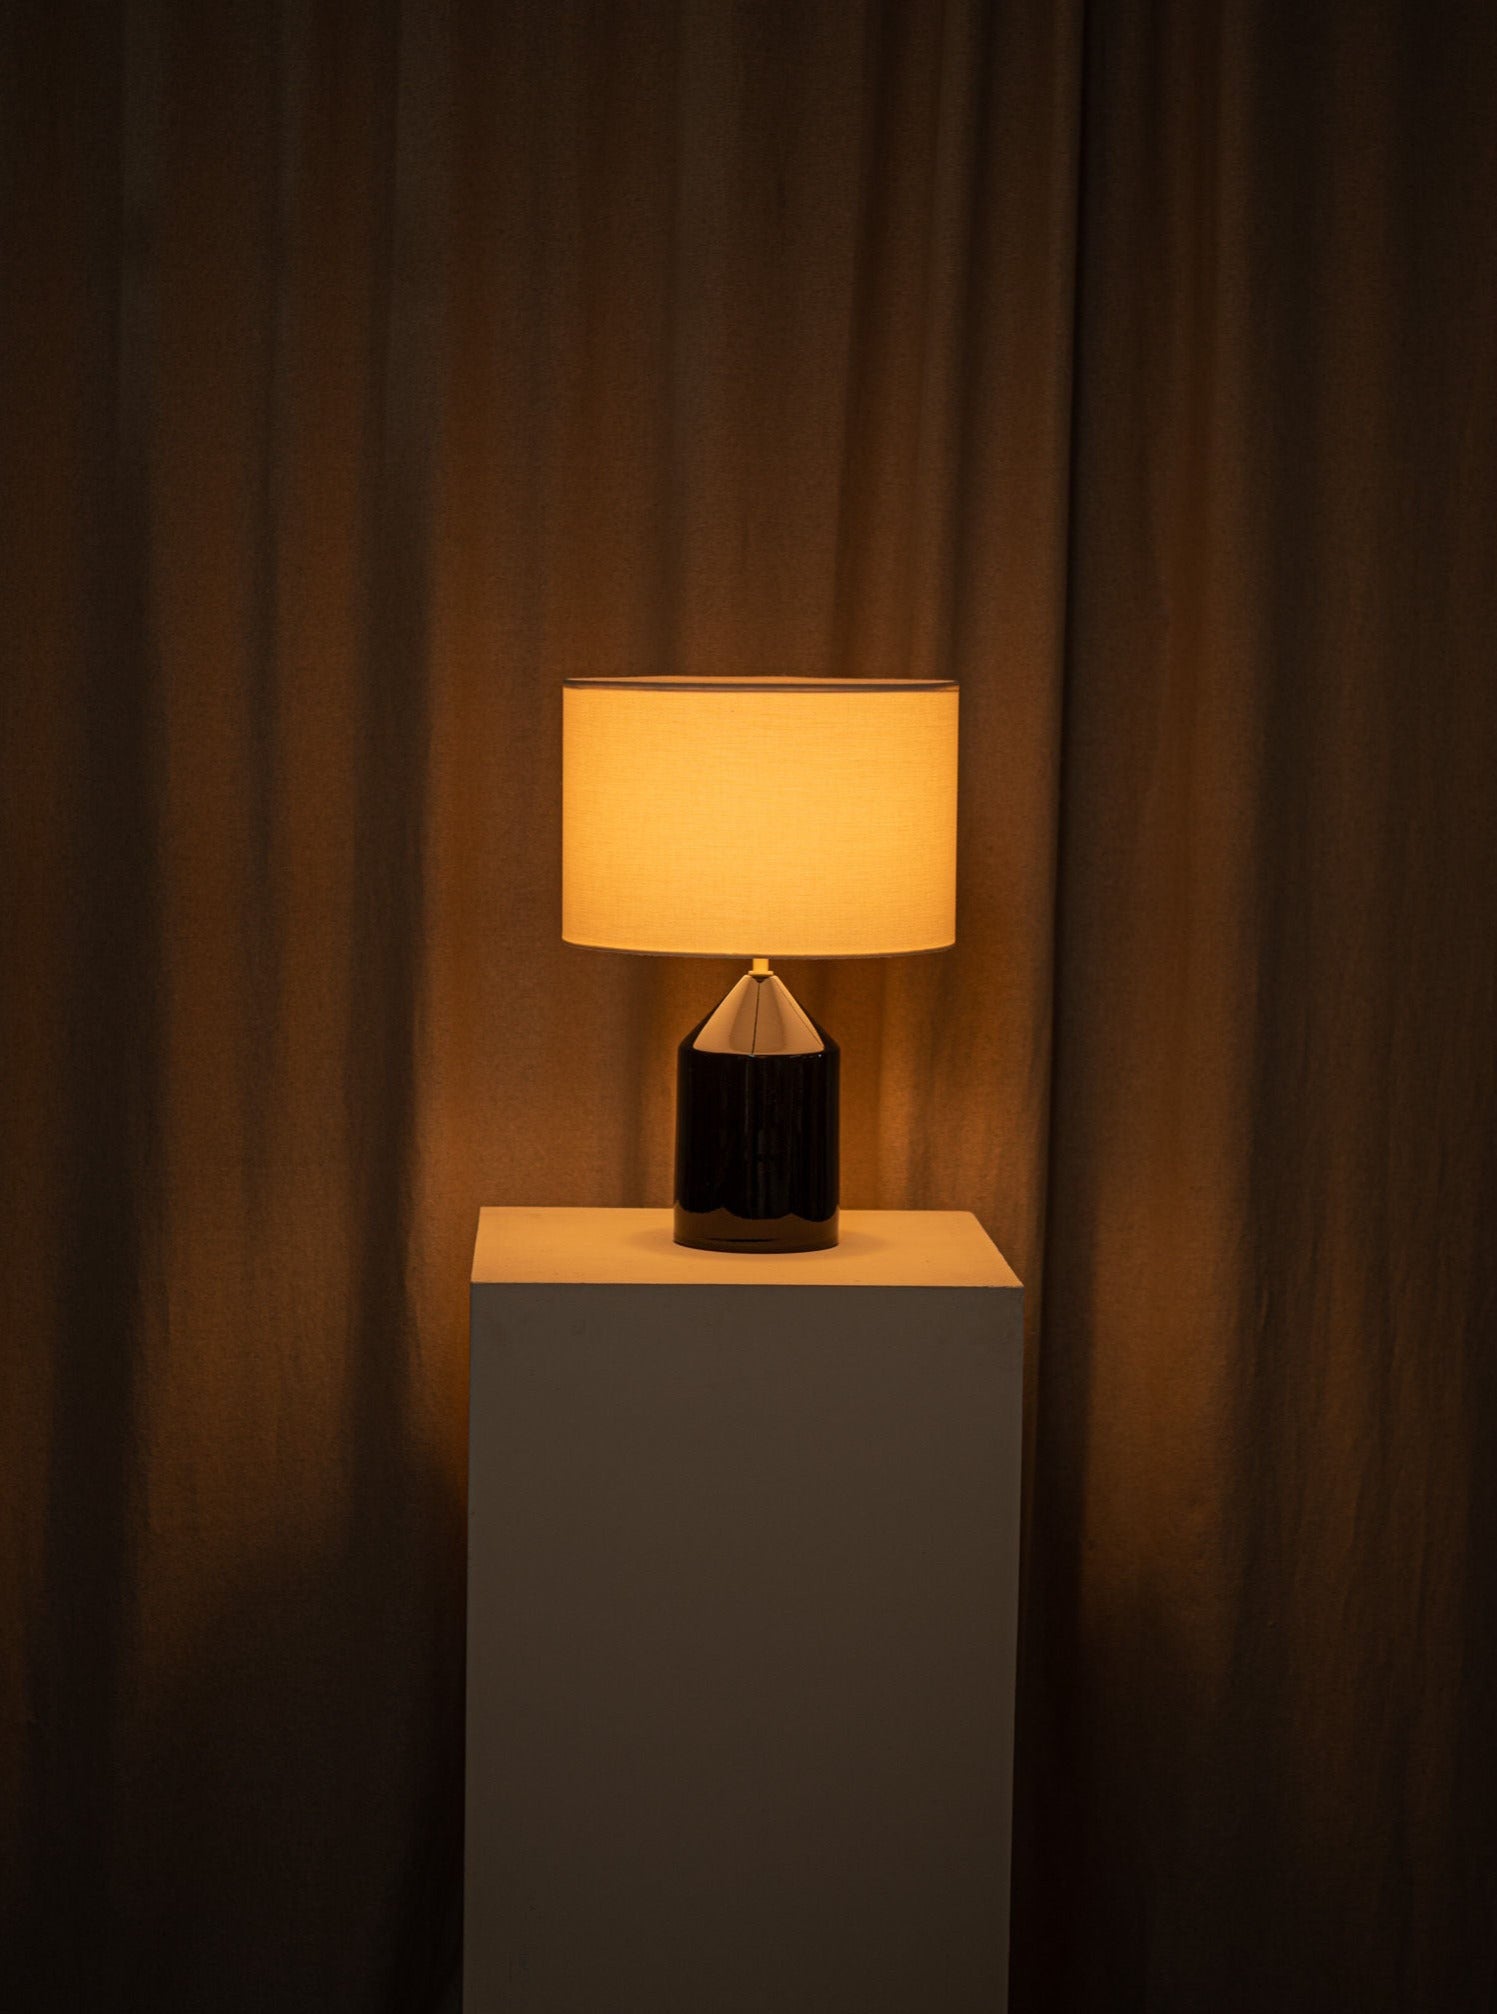 A warm-hued Simone & Marcel Josef Black Ceramic table lamp with a cotton drum lampshade casts a soft glow on a beige pedestal against a draped brown curtain background, creating a cozy and dimly lit atmosphere.